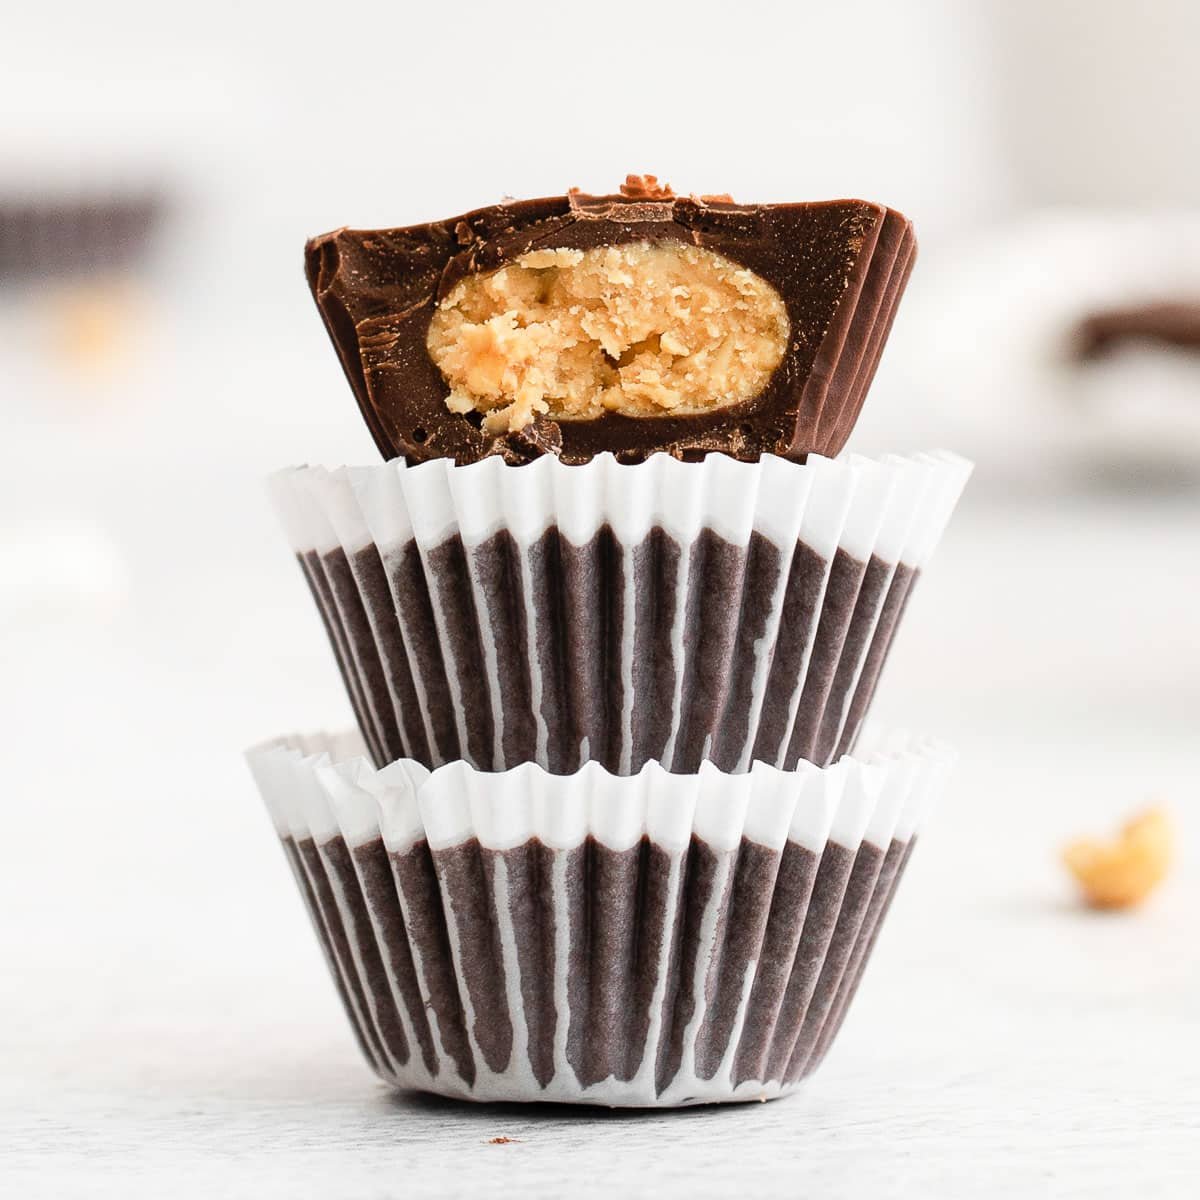 stack of three peanut butter cups with the top one cut in half and peanut butter filling showing.